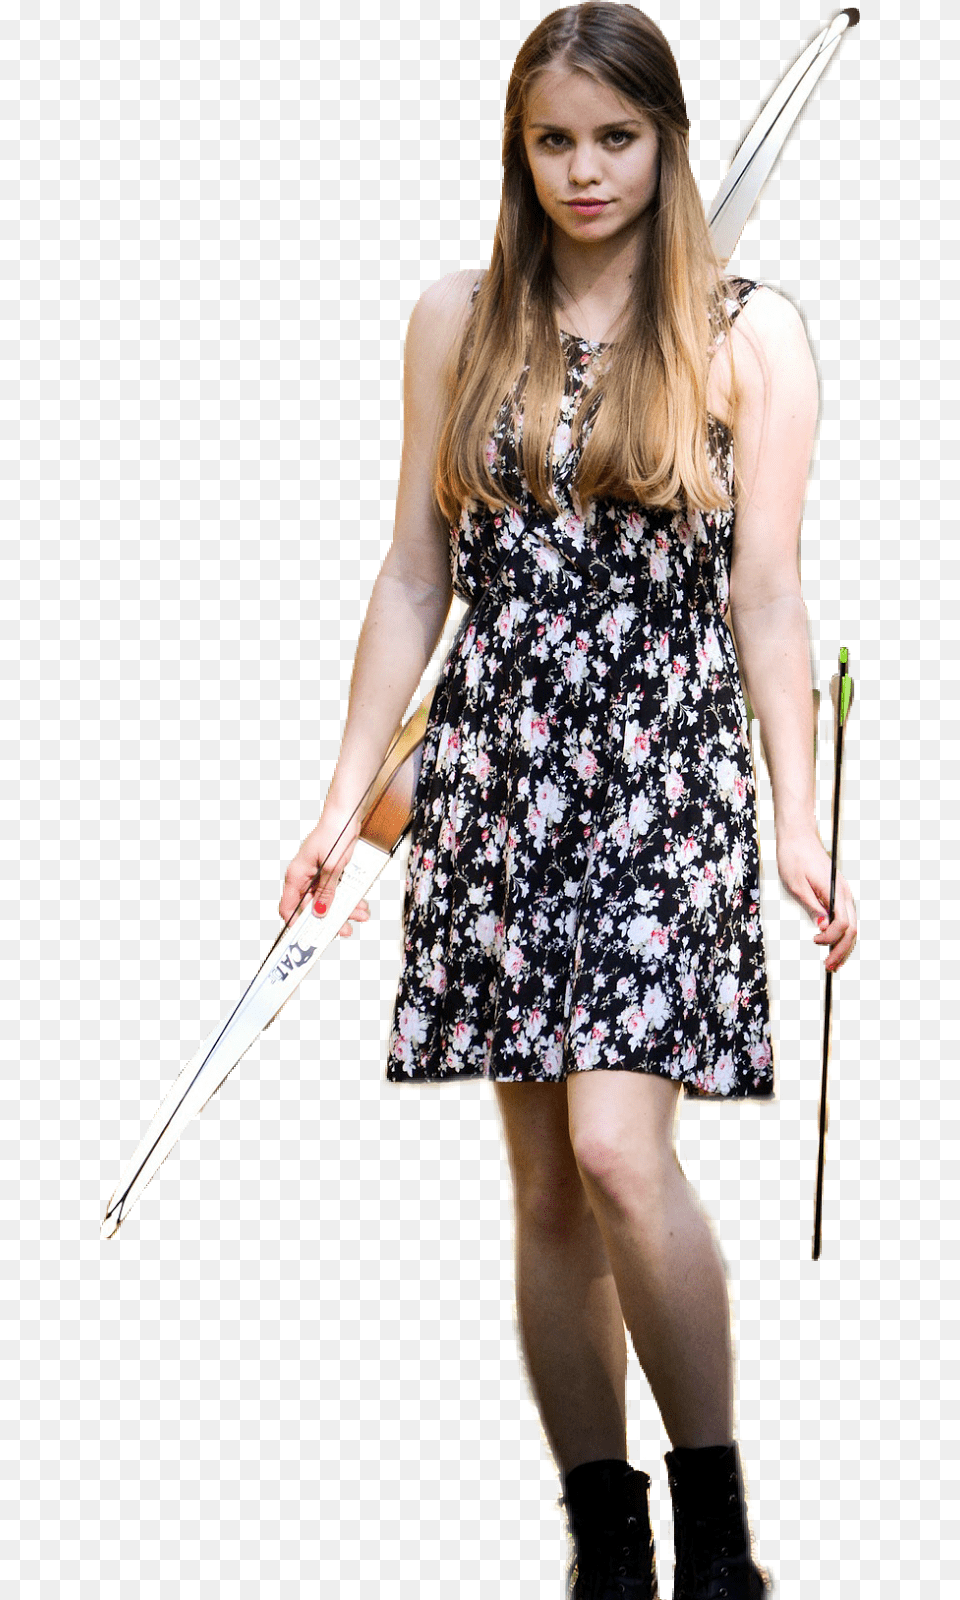 Photo Shoot, Weapon, Clothing, Sword, Dress Png